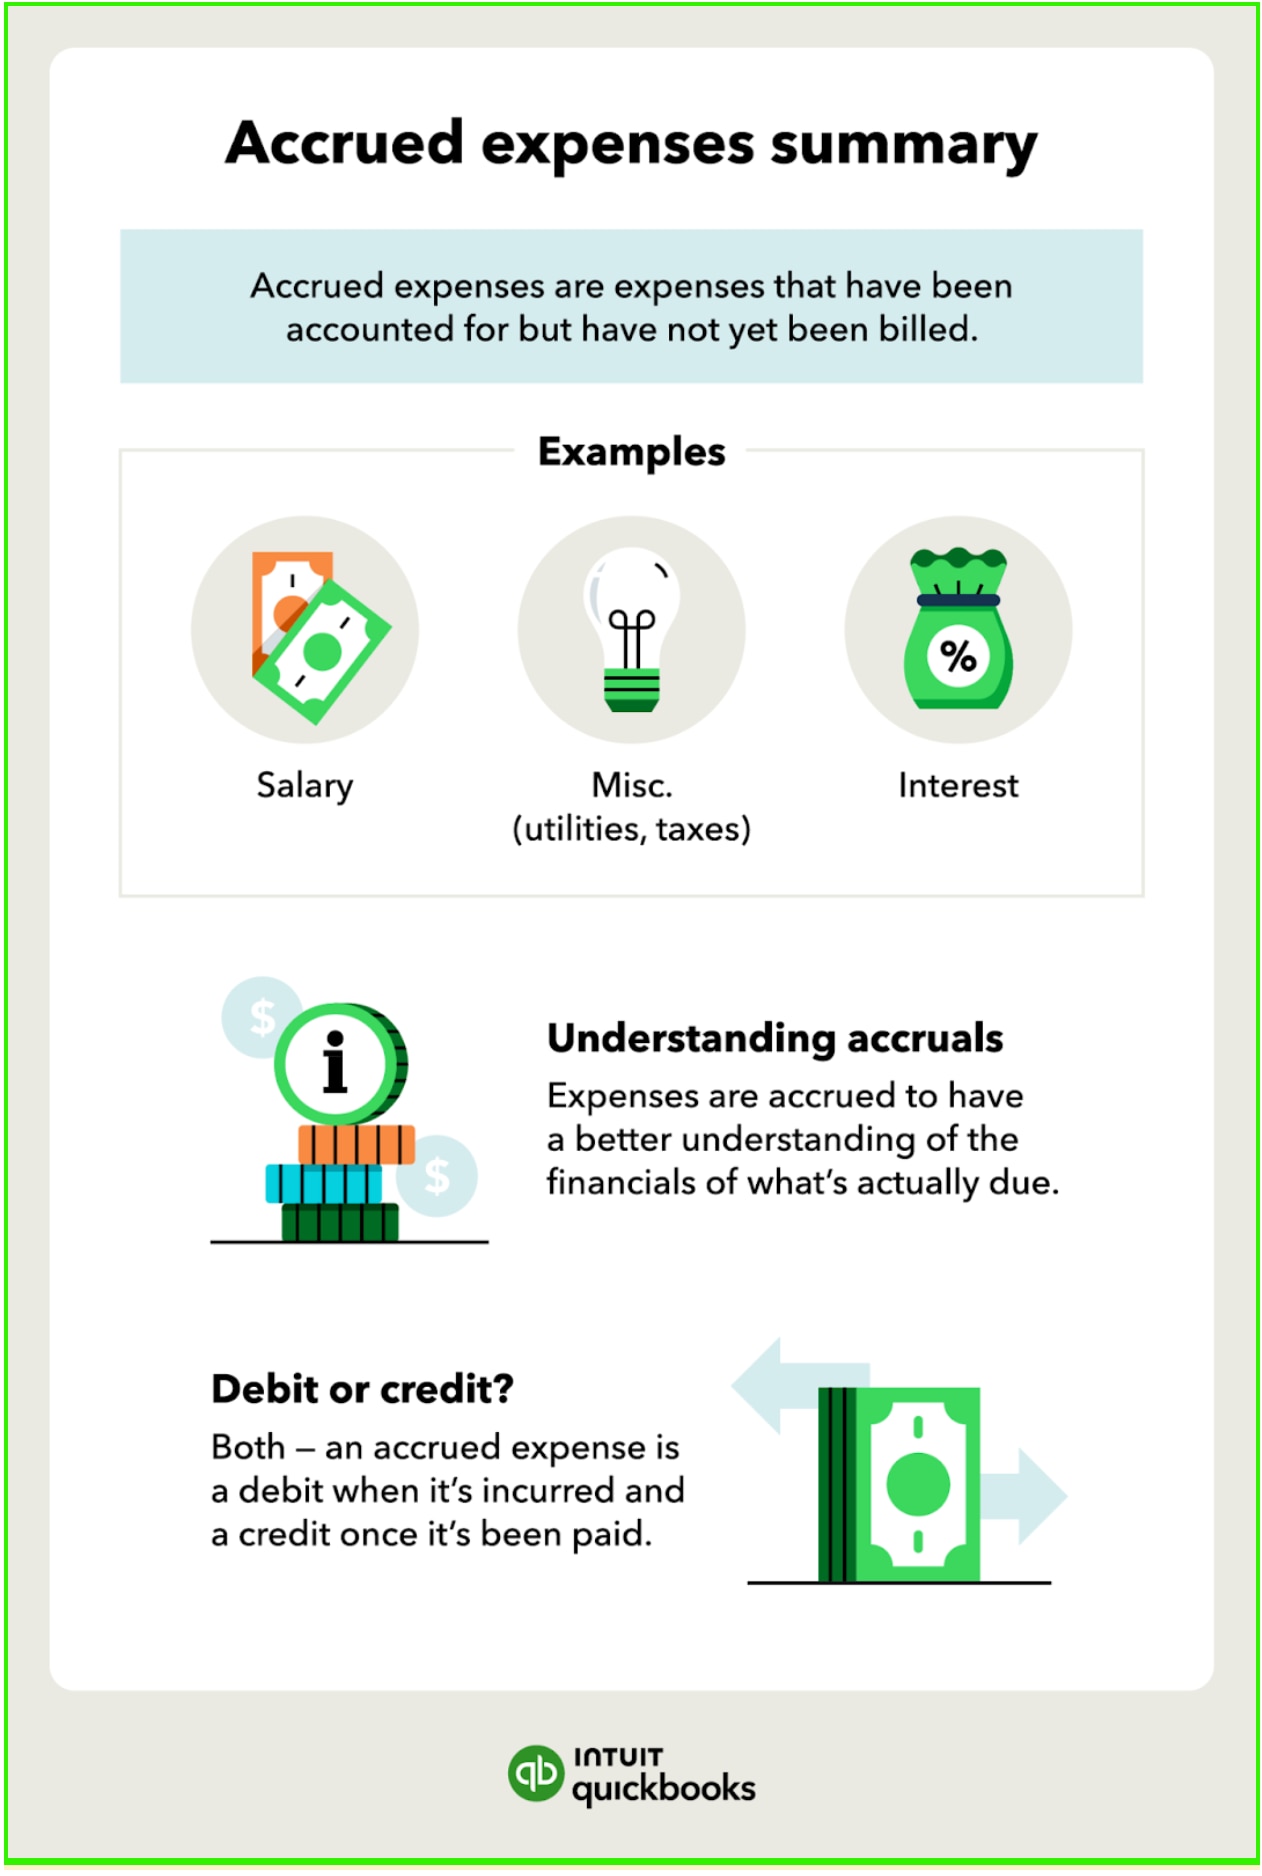 An infographic of the summary of accrued expenses including the definition and examples.